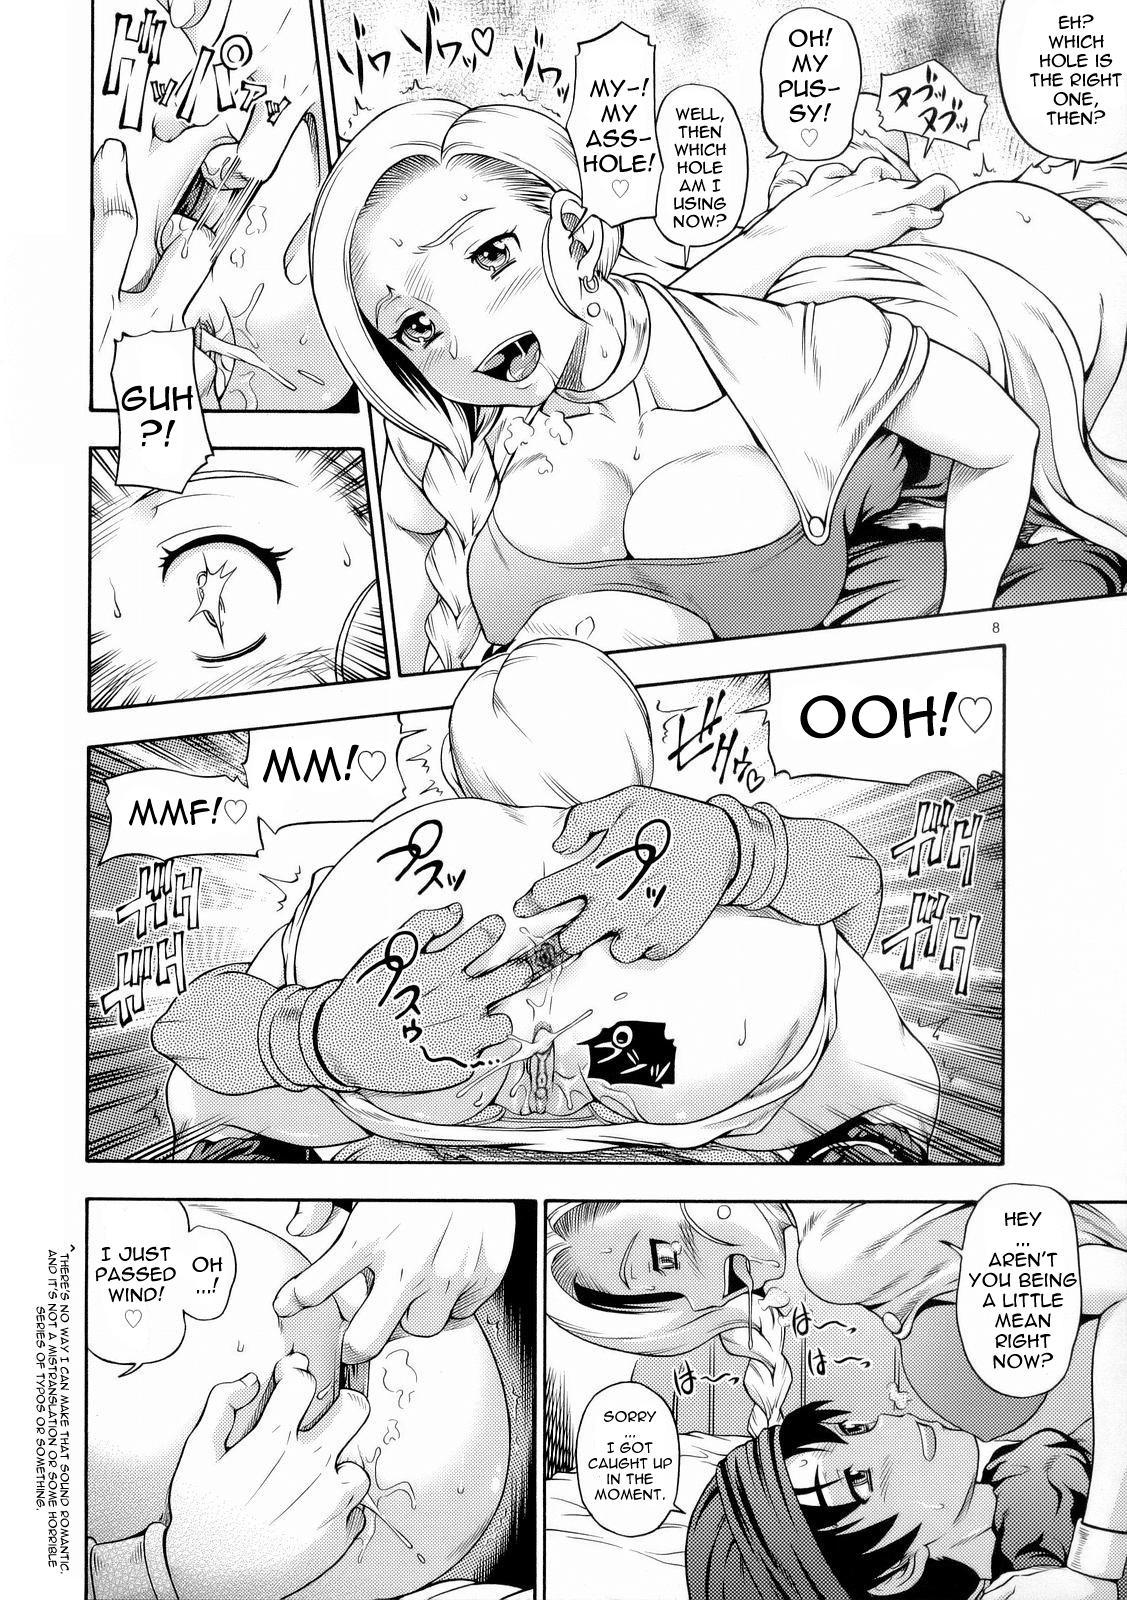 Ass Fucked Bianca Milk 5.1 - Dragon quest v Woman Fucking - Page 6